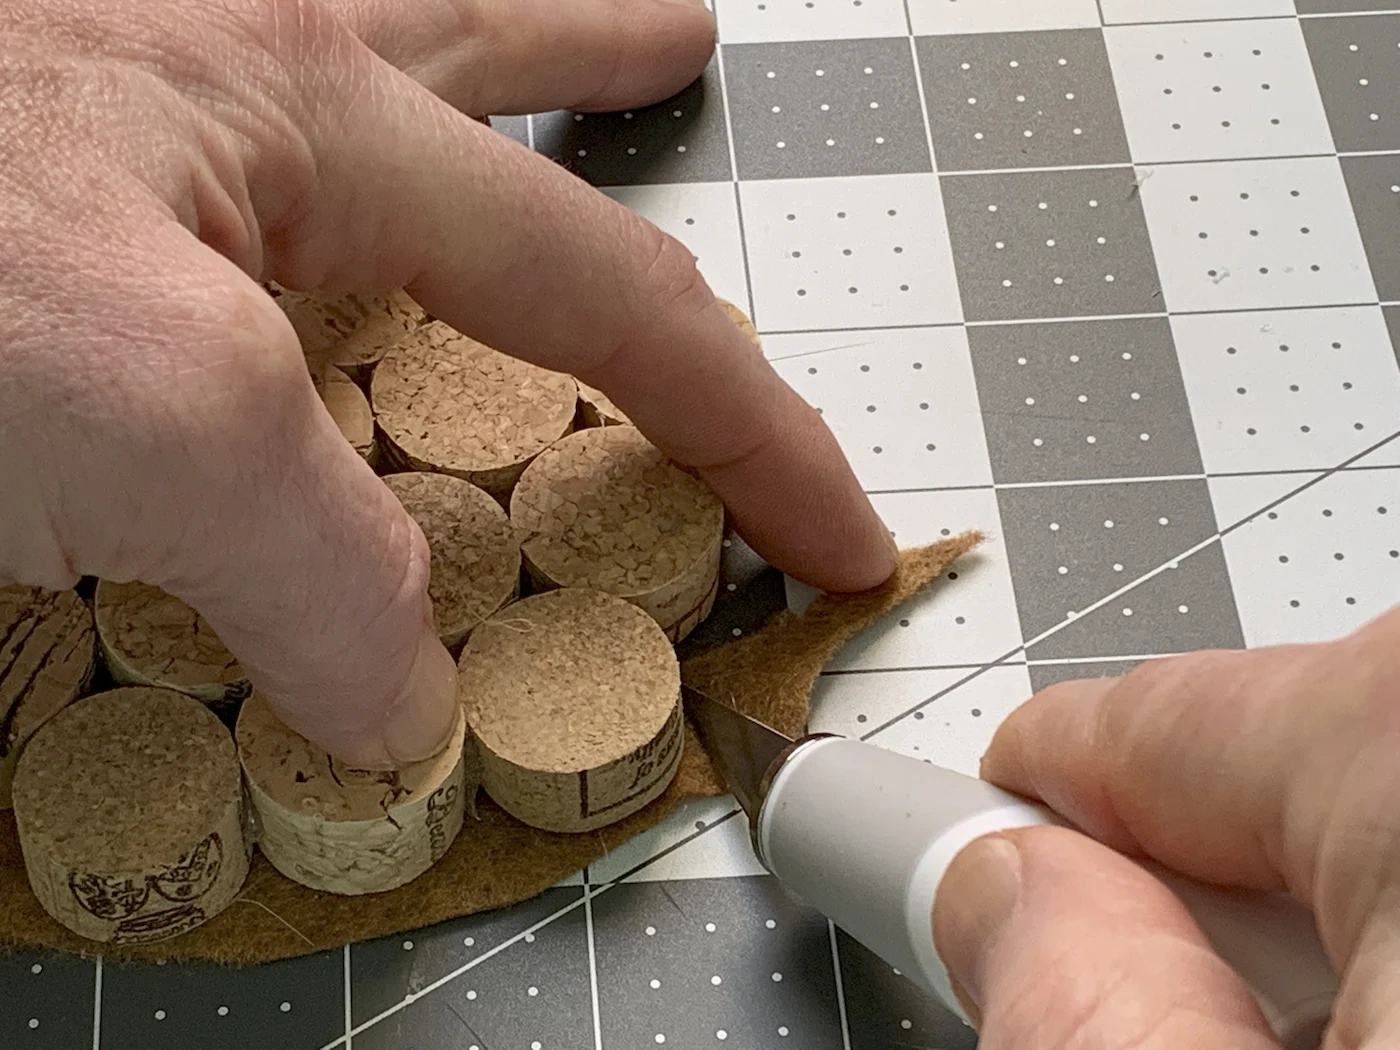 Trimming felt from around the wine corks with a craft knife